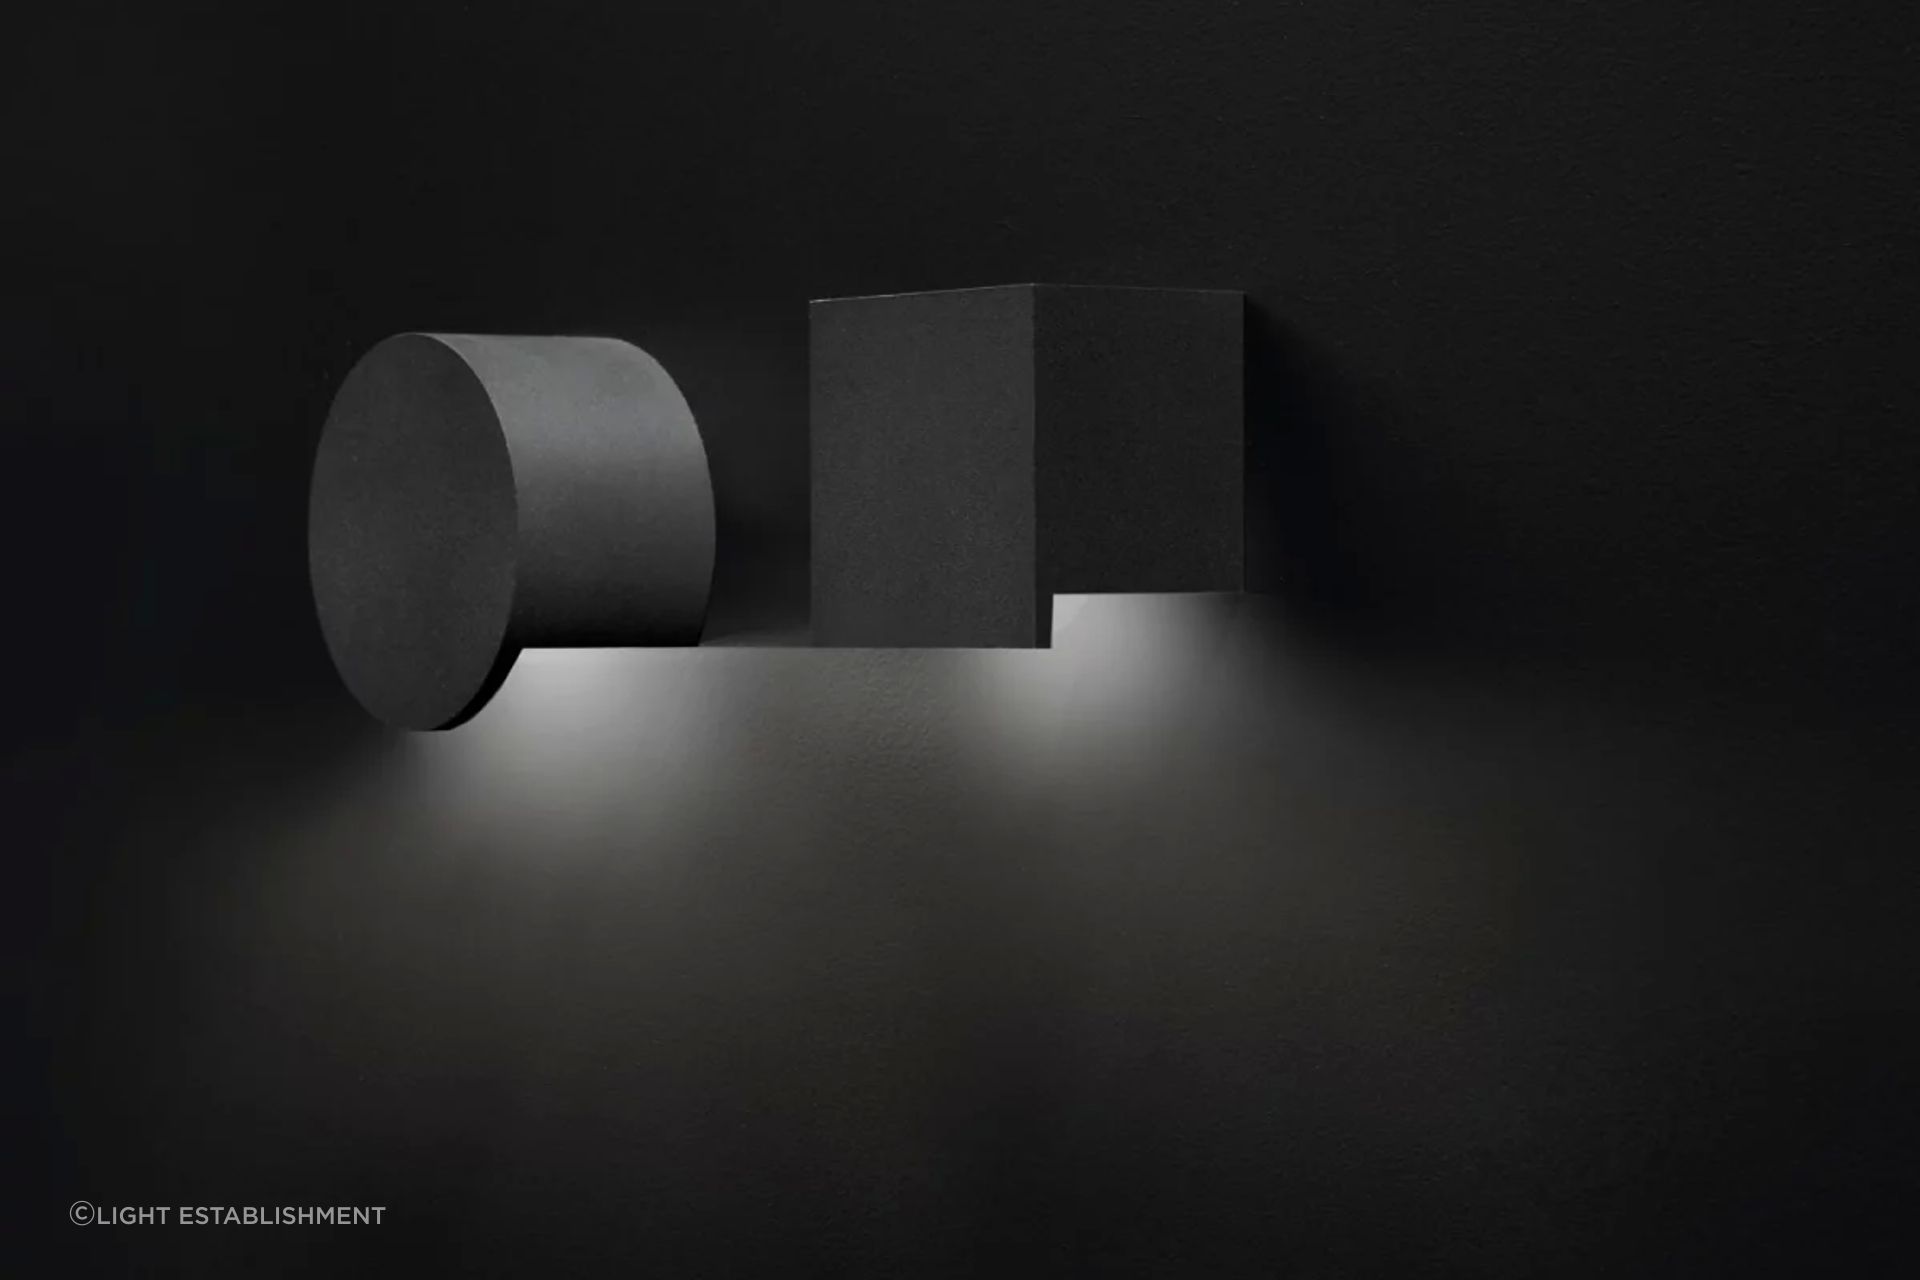 Stip by Delta Light offers a sleek, sculptural solution for low level wall lighting applications.